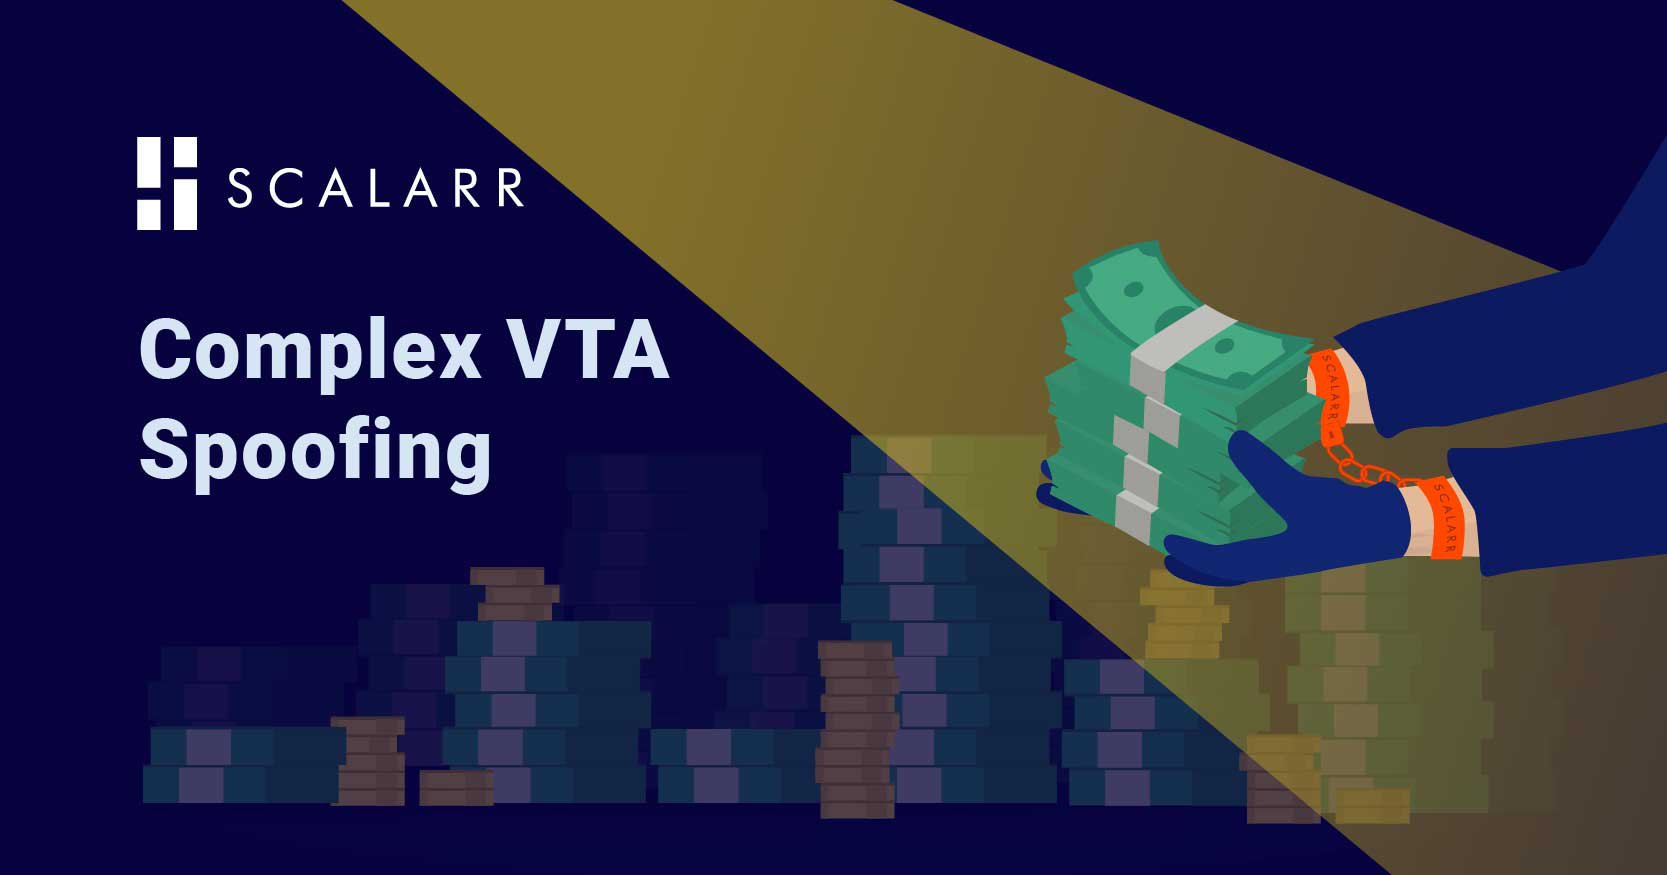 Scalarr discovered Complex VTA Spoofing fraud